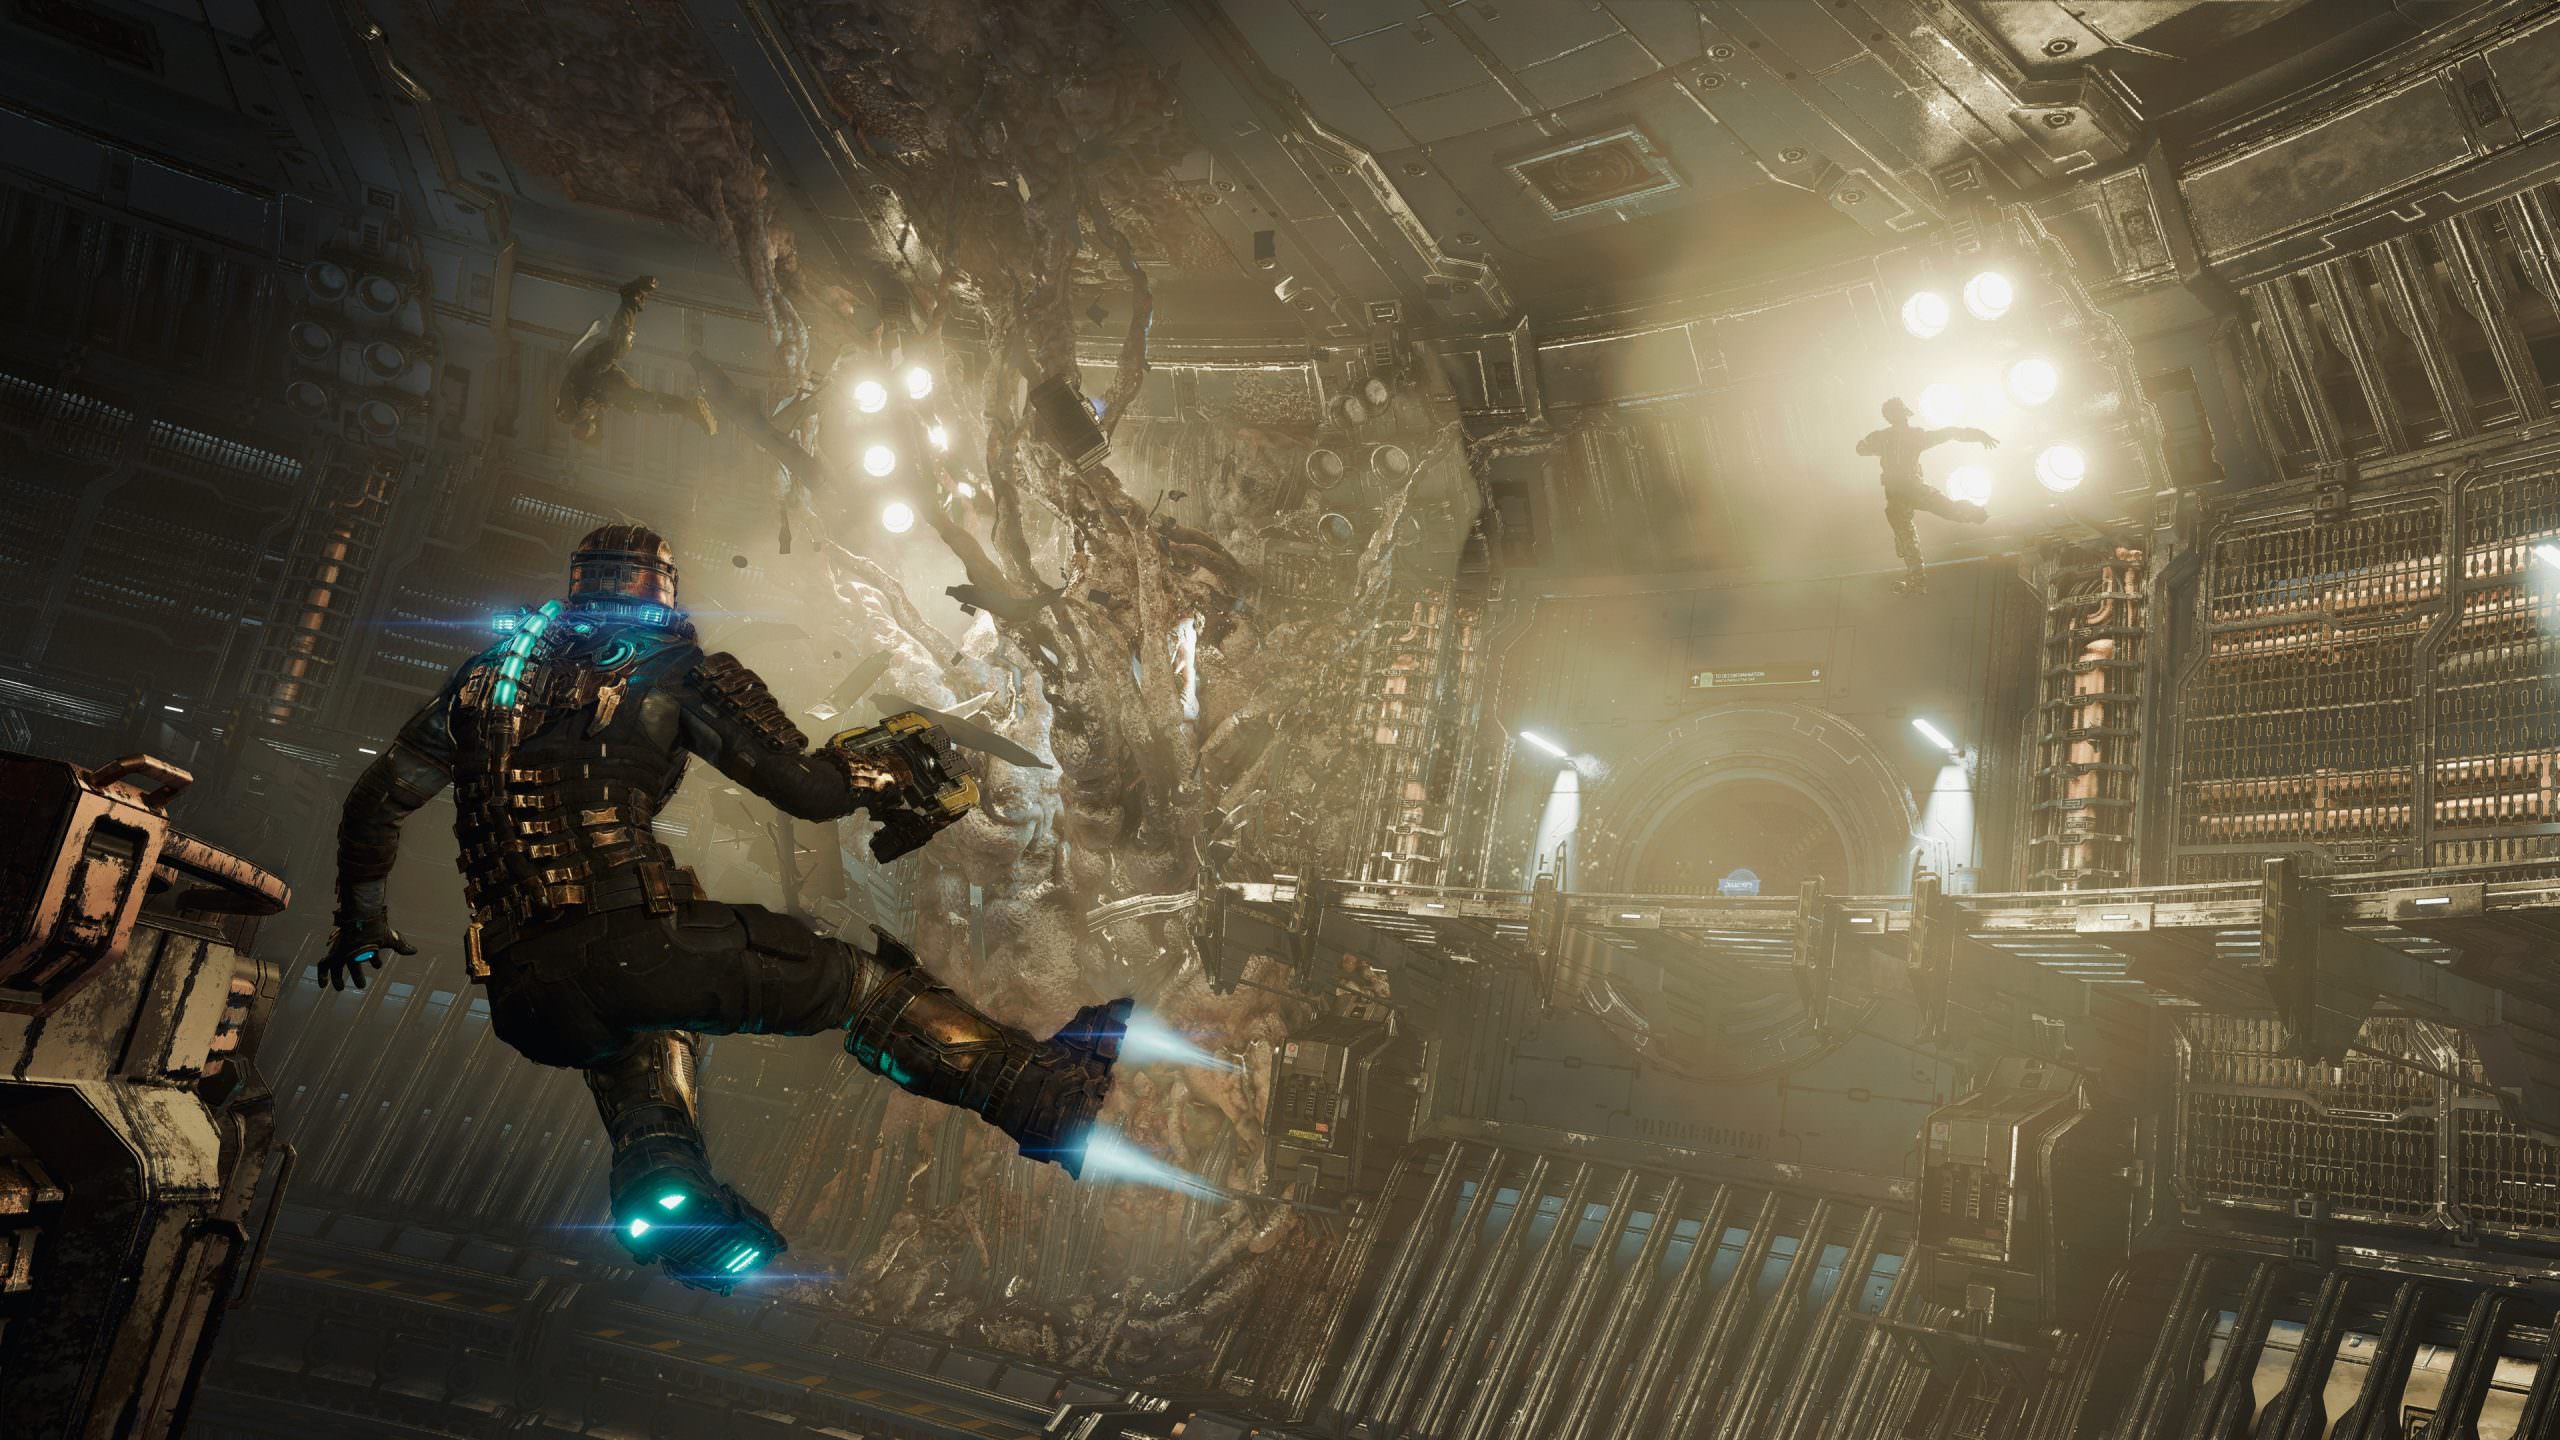 dead space remake image scaled  Image of dead space remake image scaled